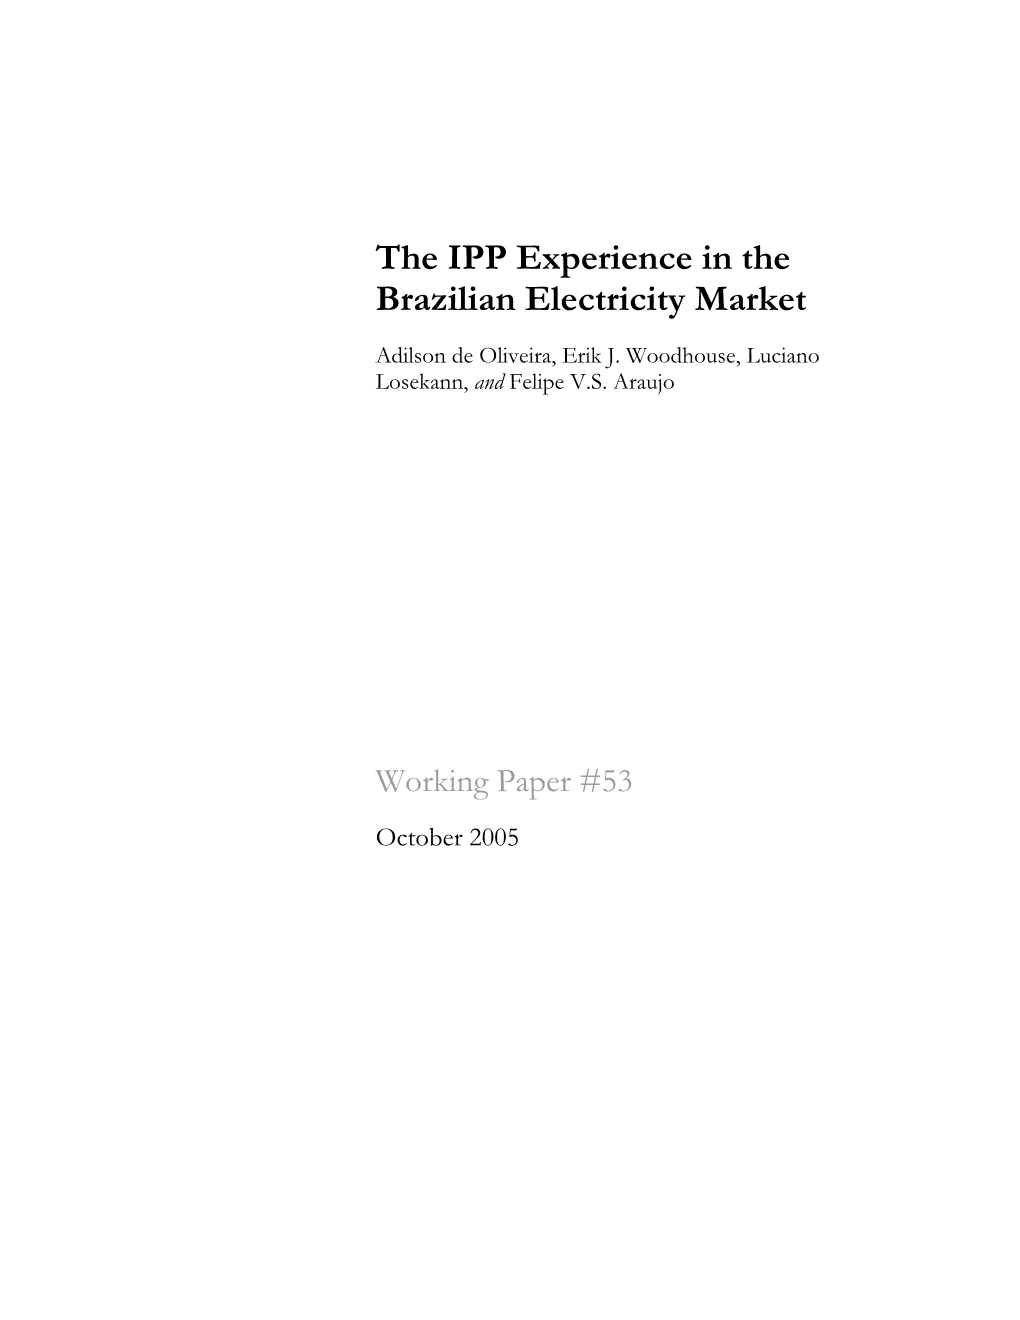 The IPP Experience in the Brazilian Electricity Market